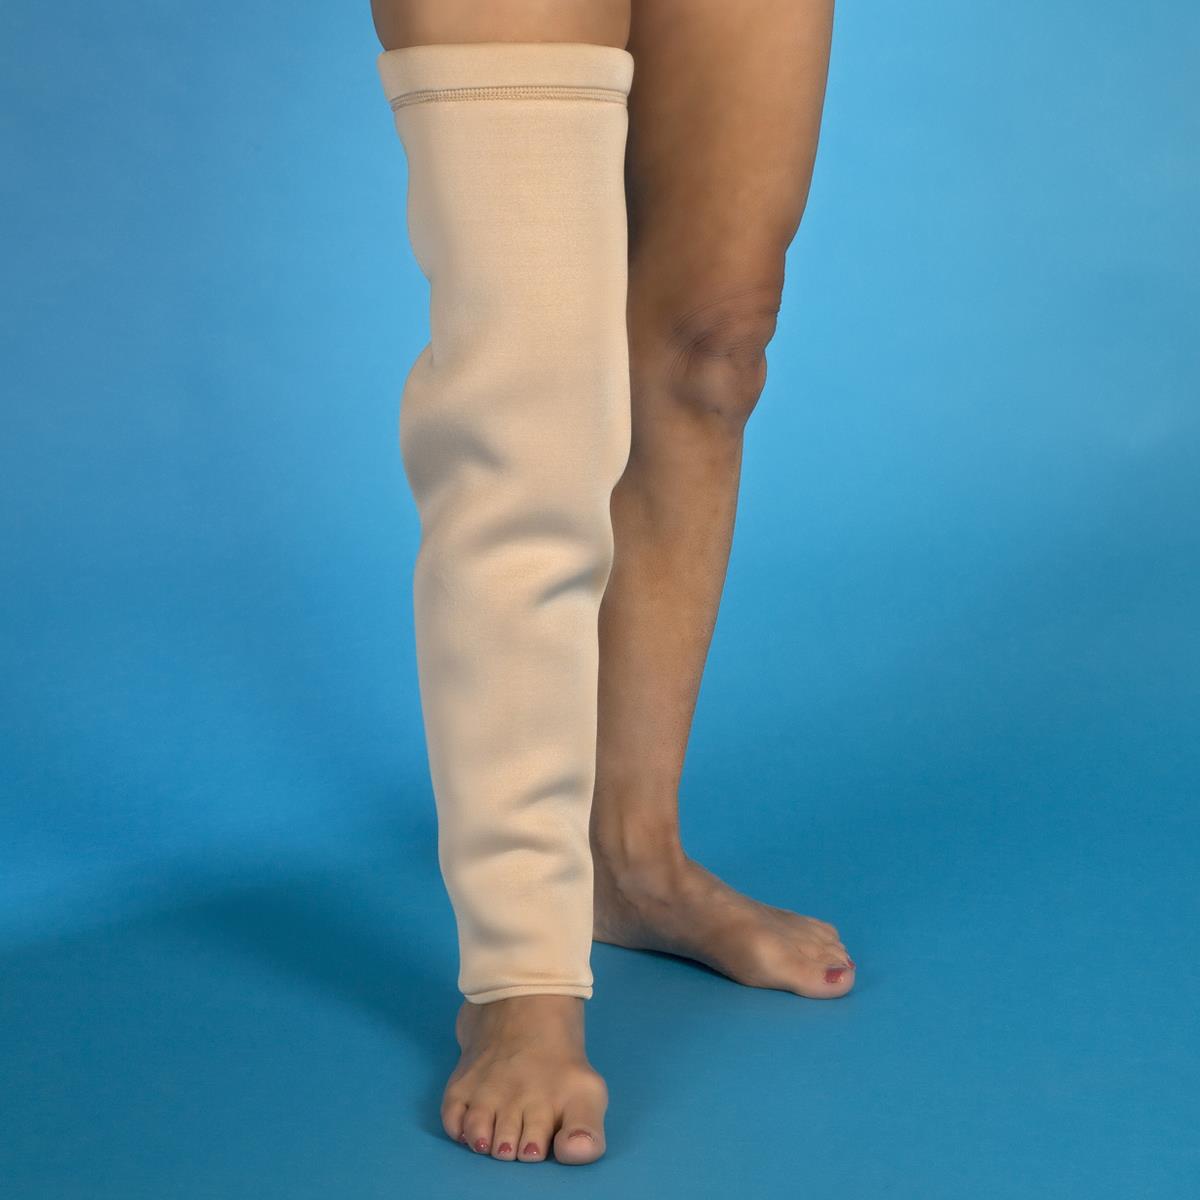 Medline Protective Arm and Leg Sleeves - Shop All